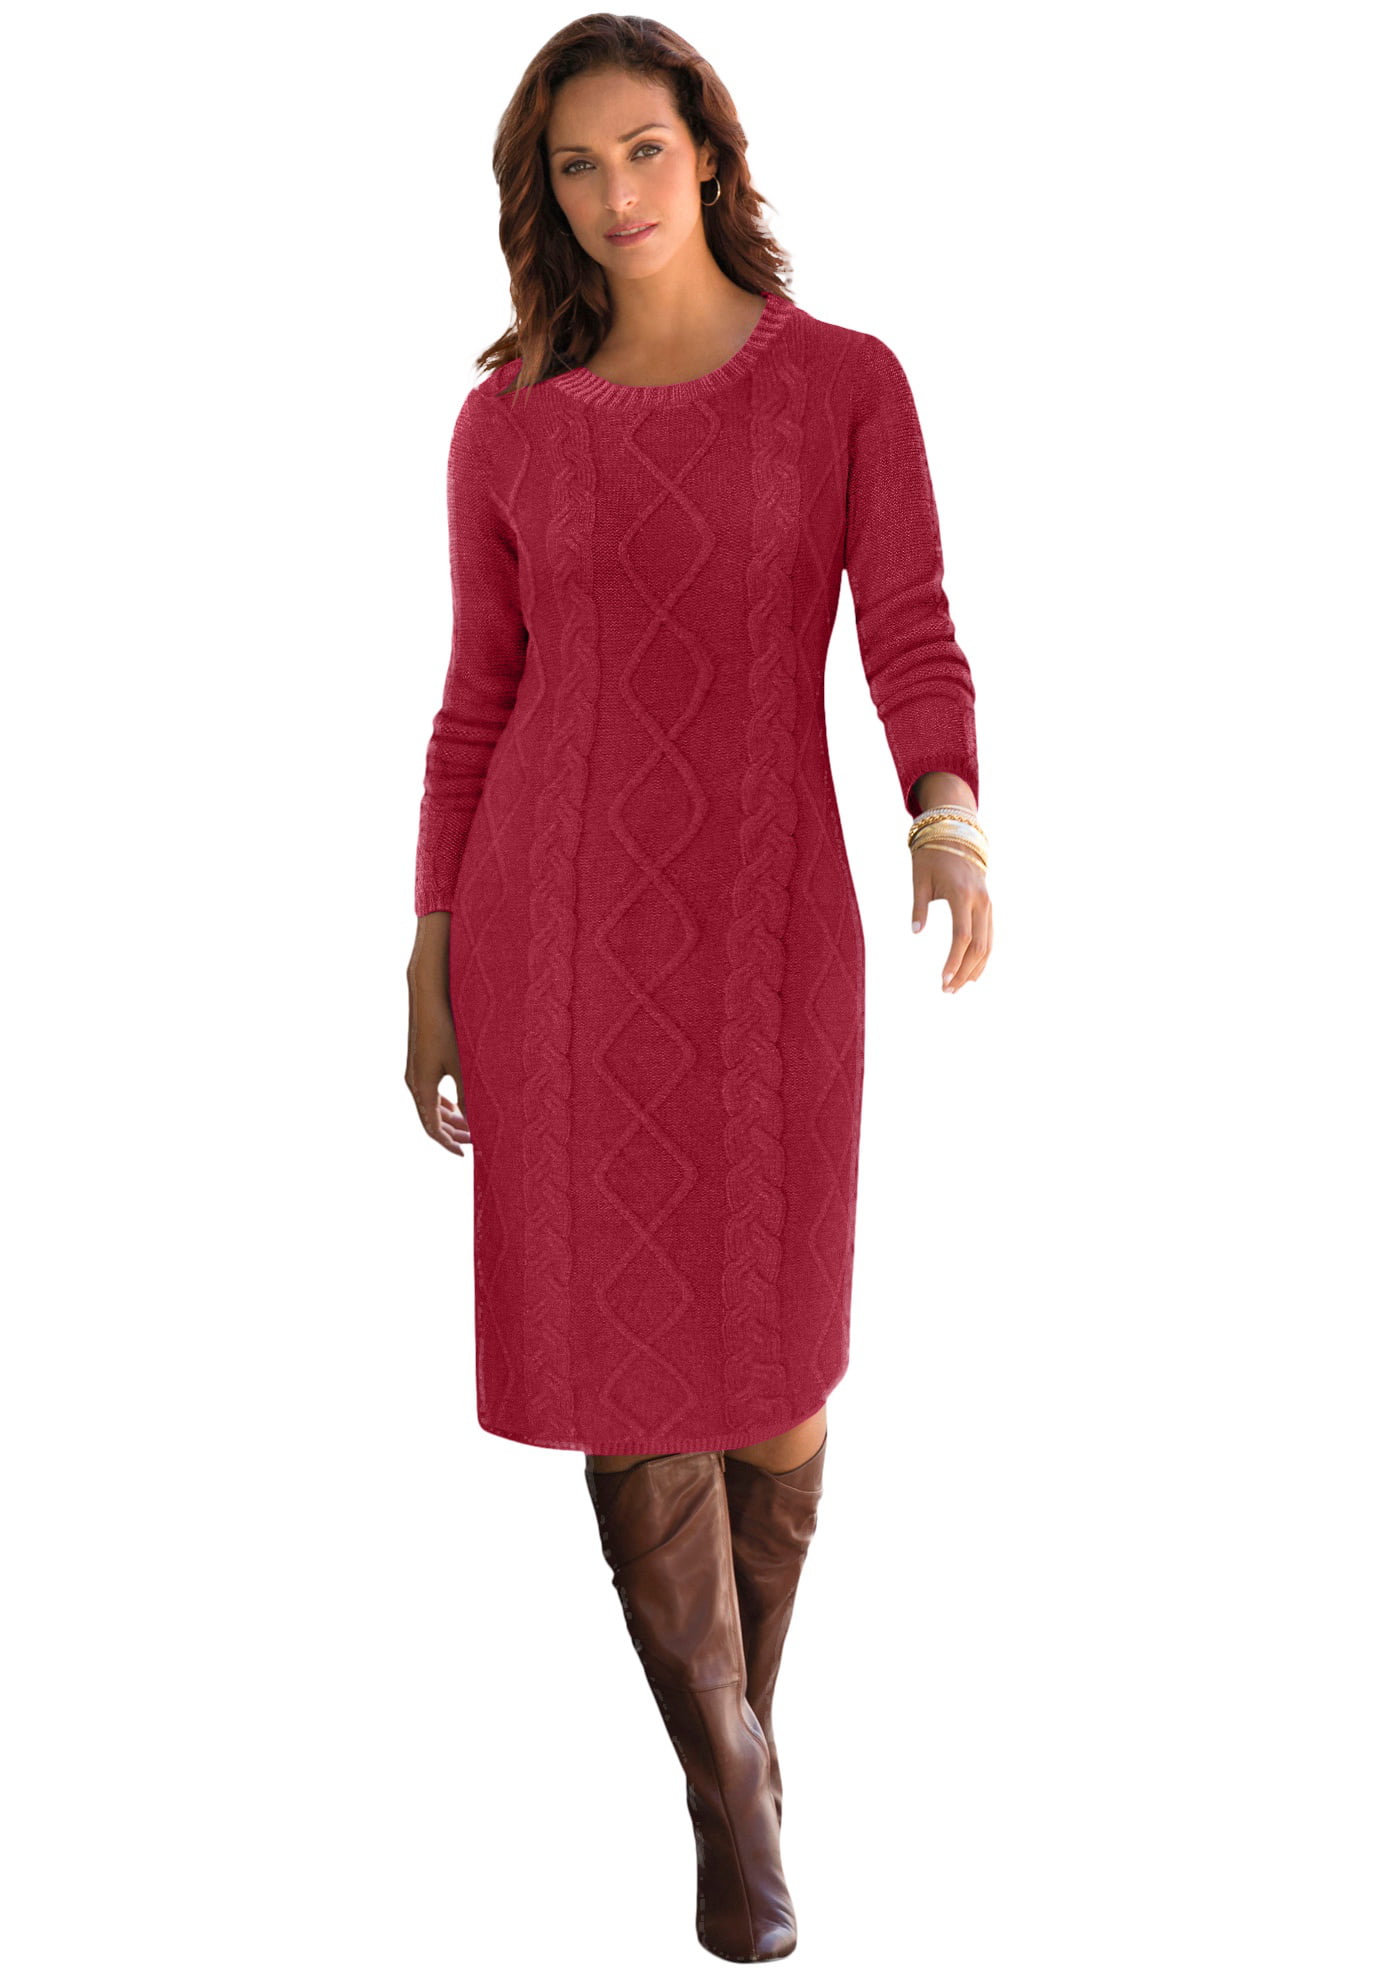 Plus Size Cable Sweater Dress - 14 ...